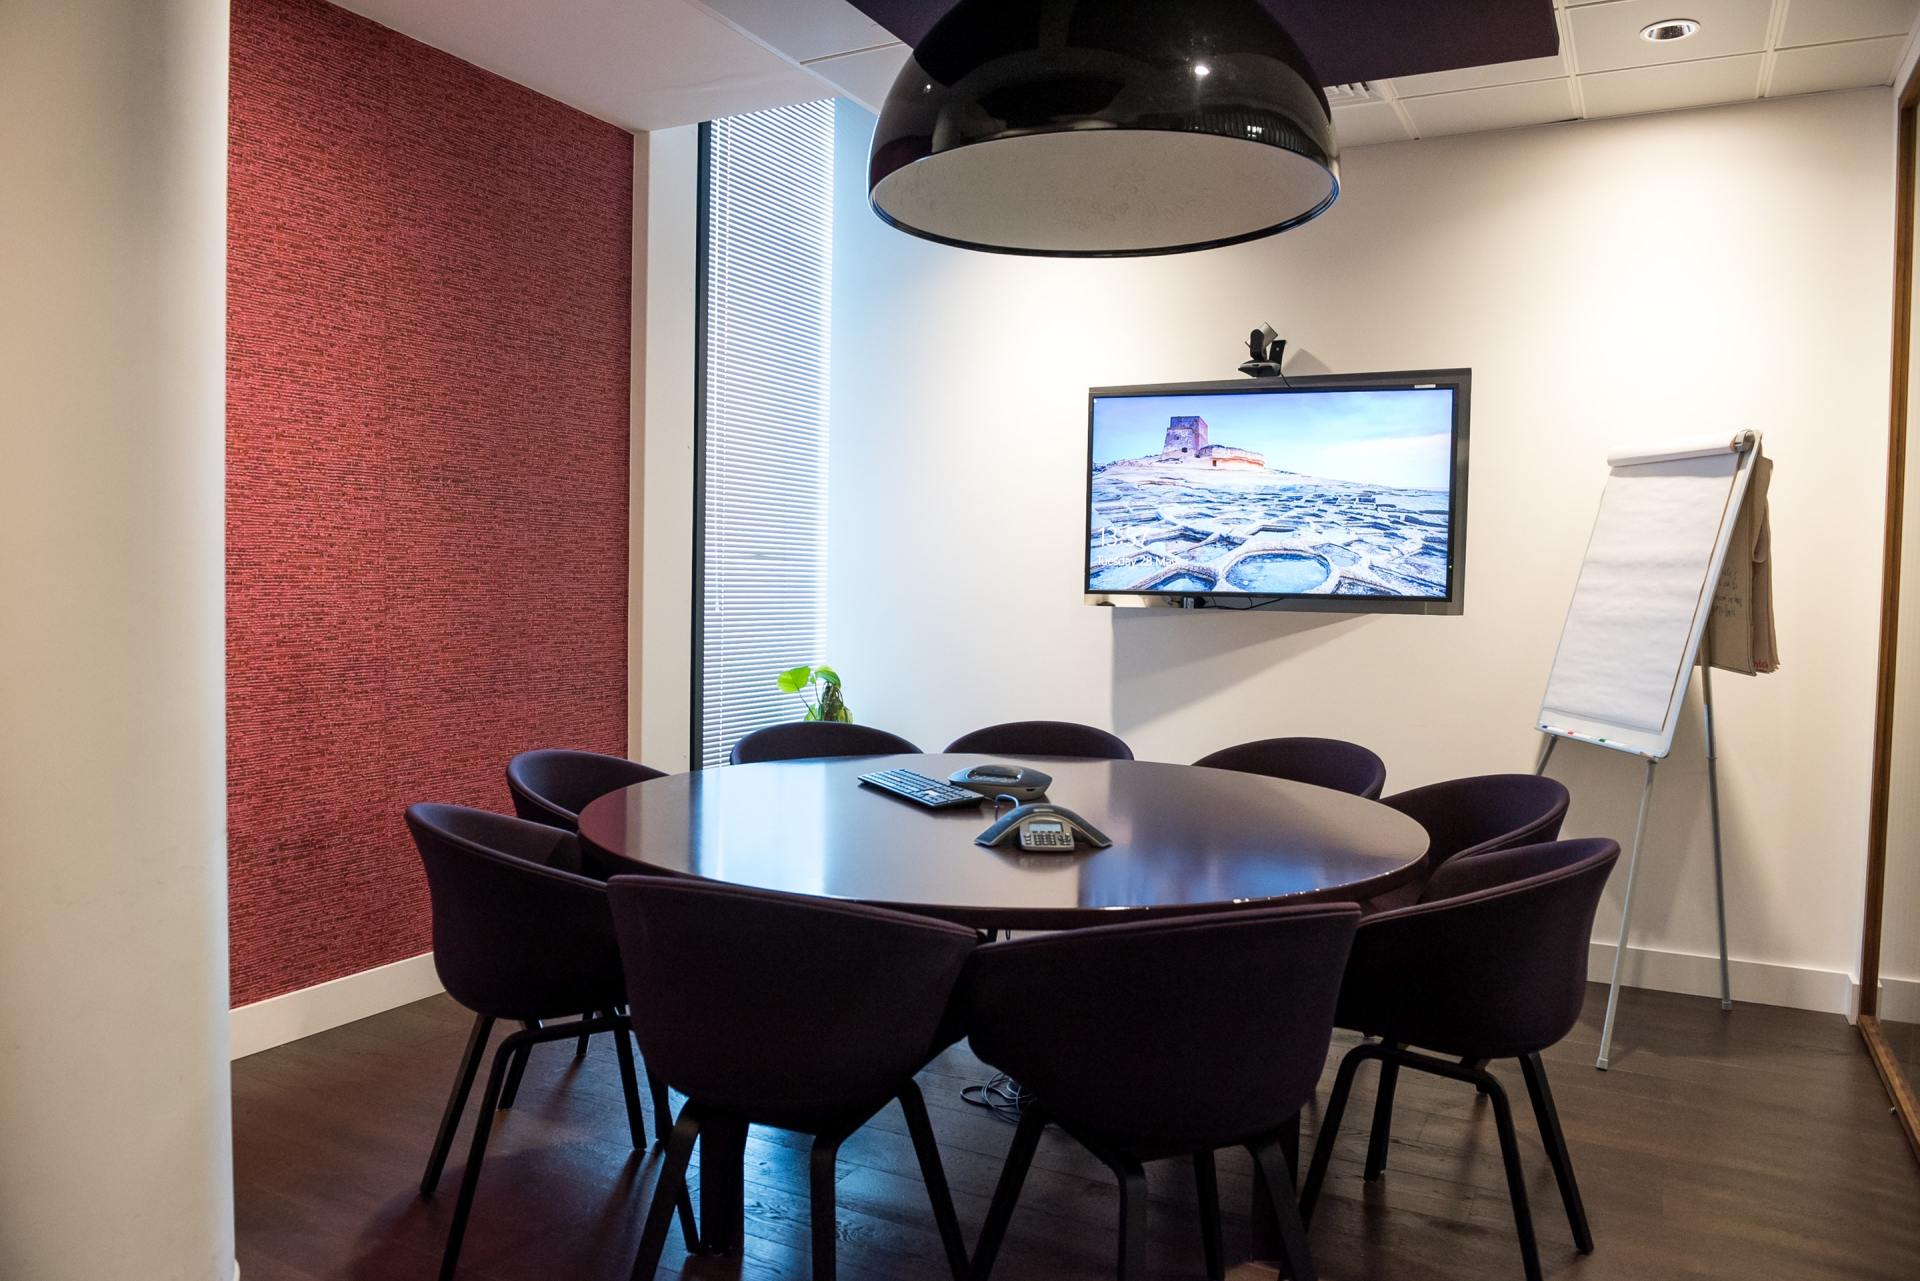 Video Conference Room Hire in Newcastle, NSW